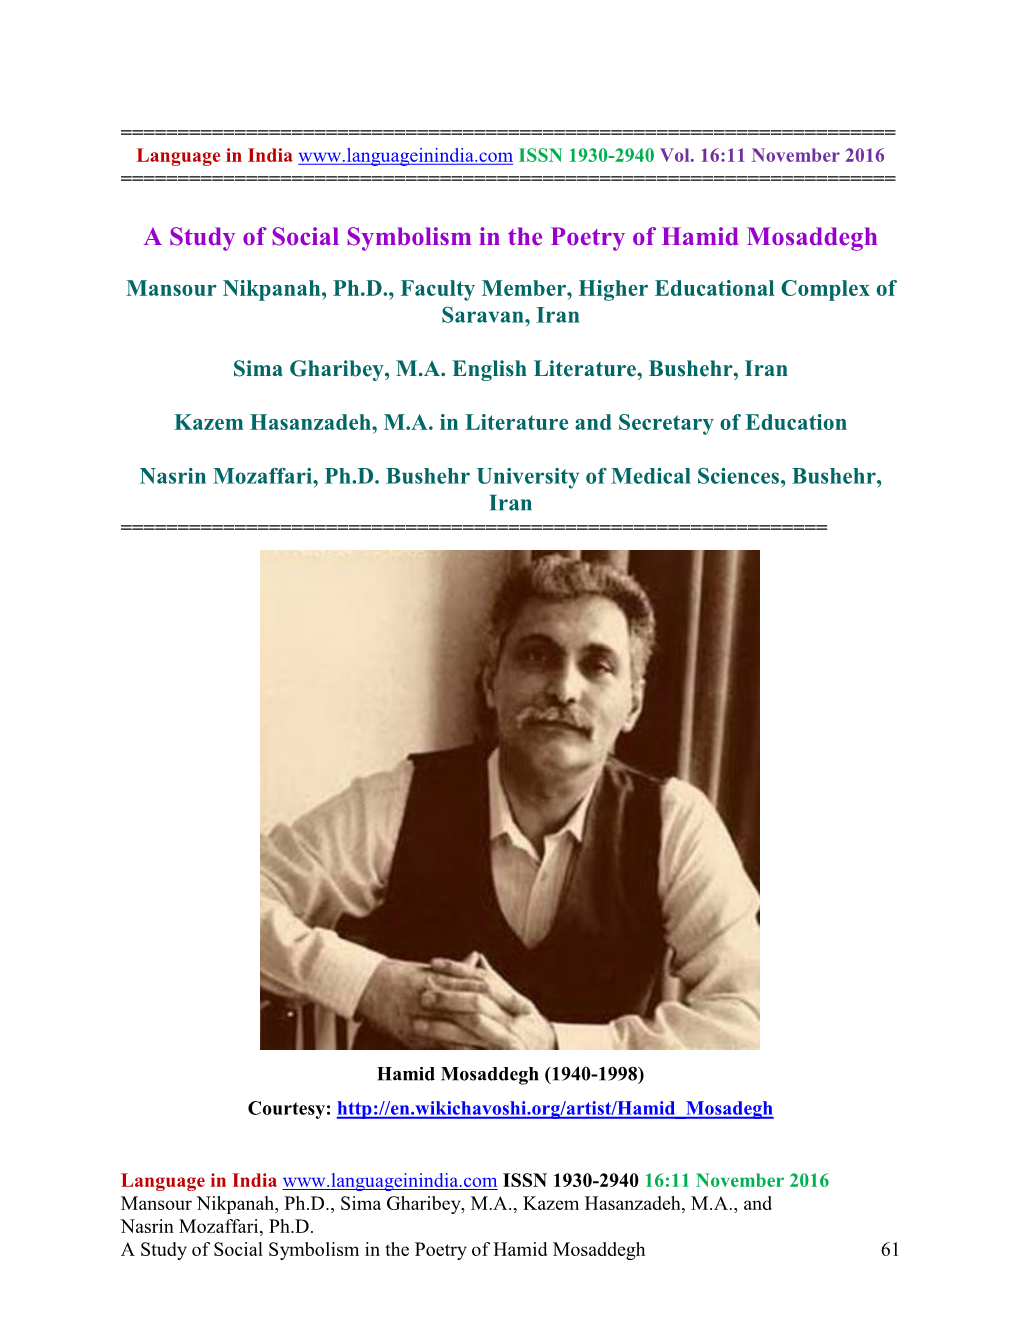 Analysis of Social Symbolism in Poetry of Hamid Mossadegh